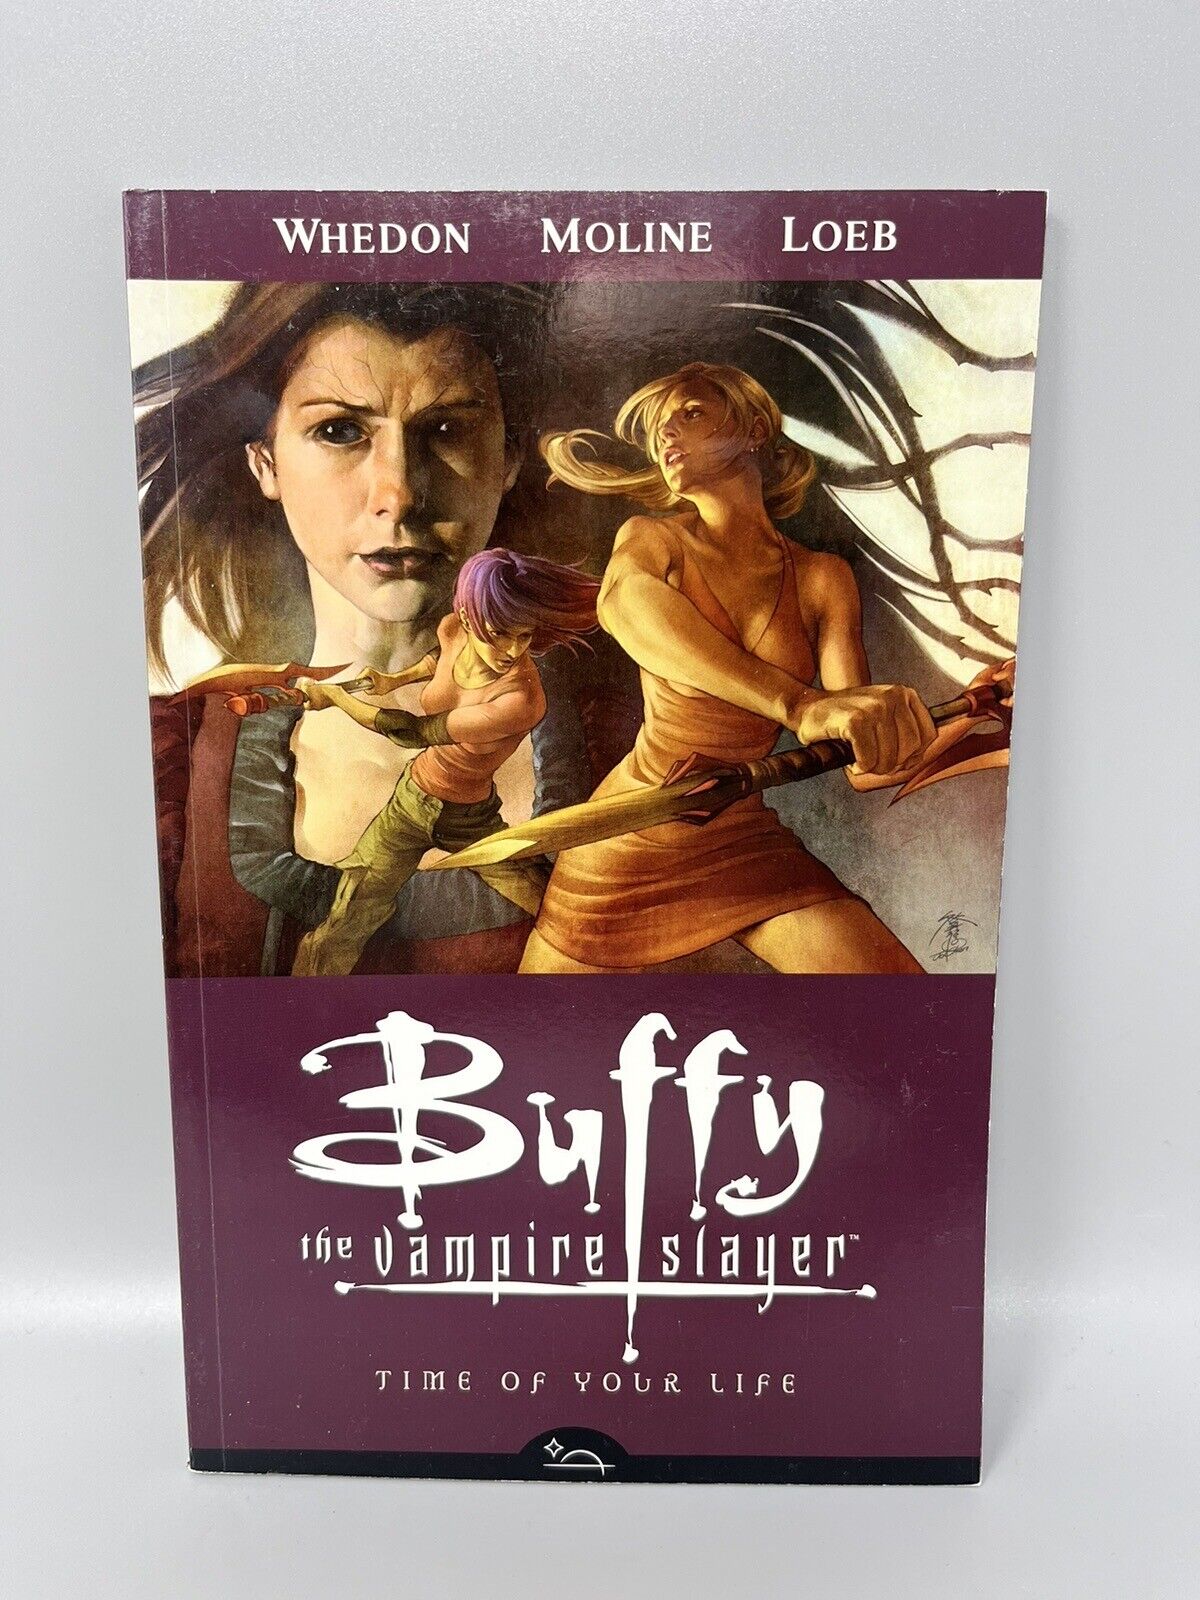 Buffy the Vampire Slayer Season 8 Volume 4: Time of Your Life by Joss Whedon